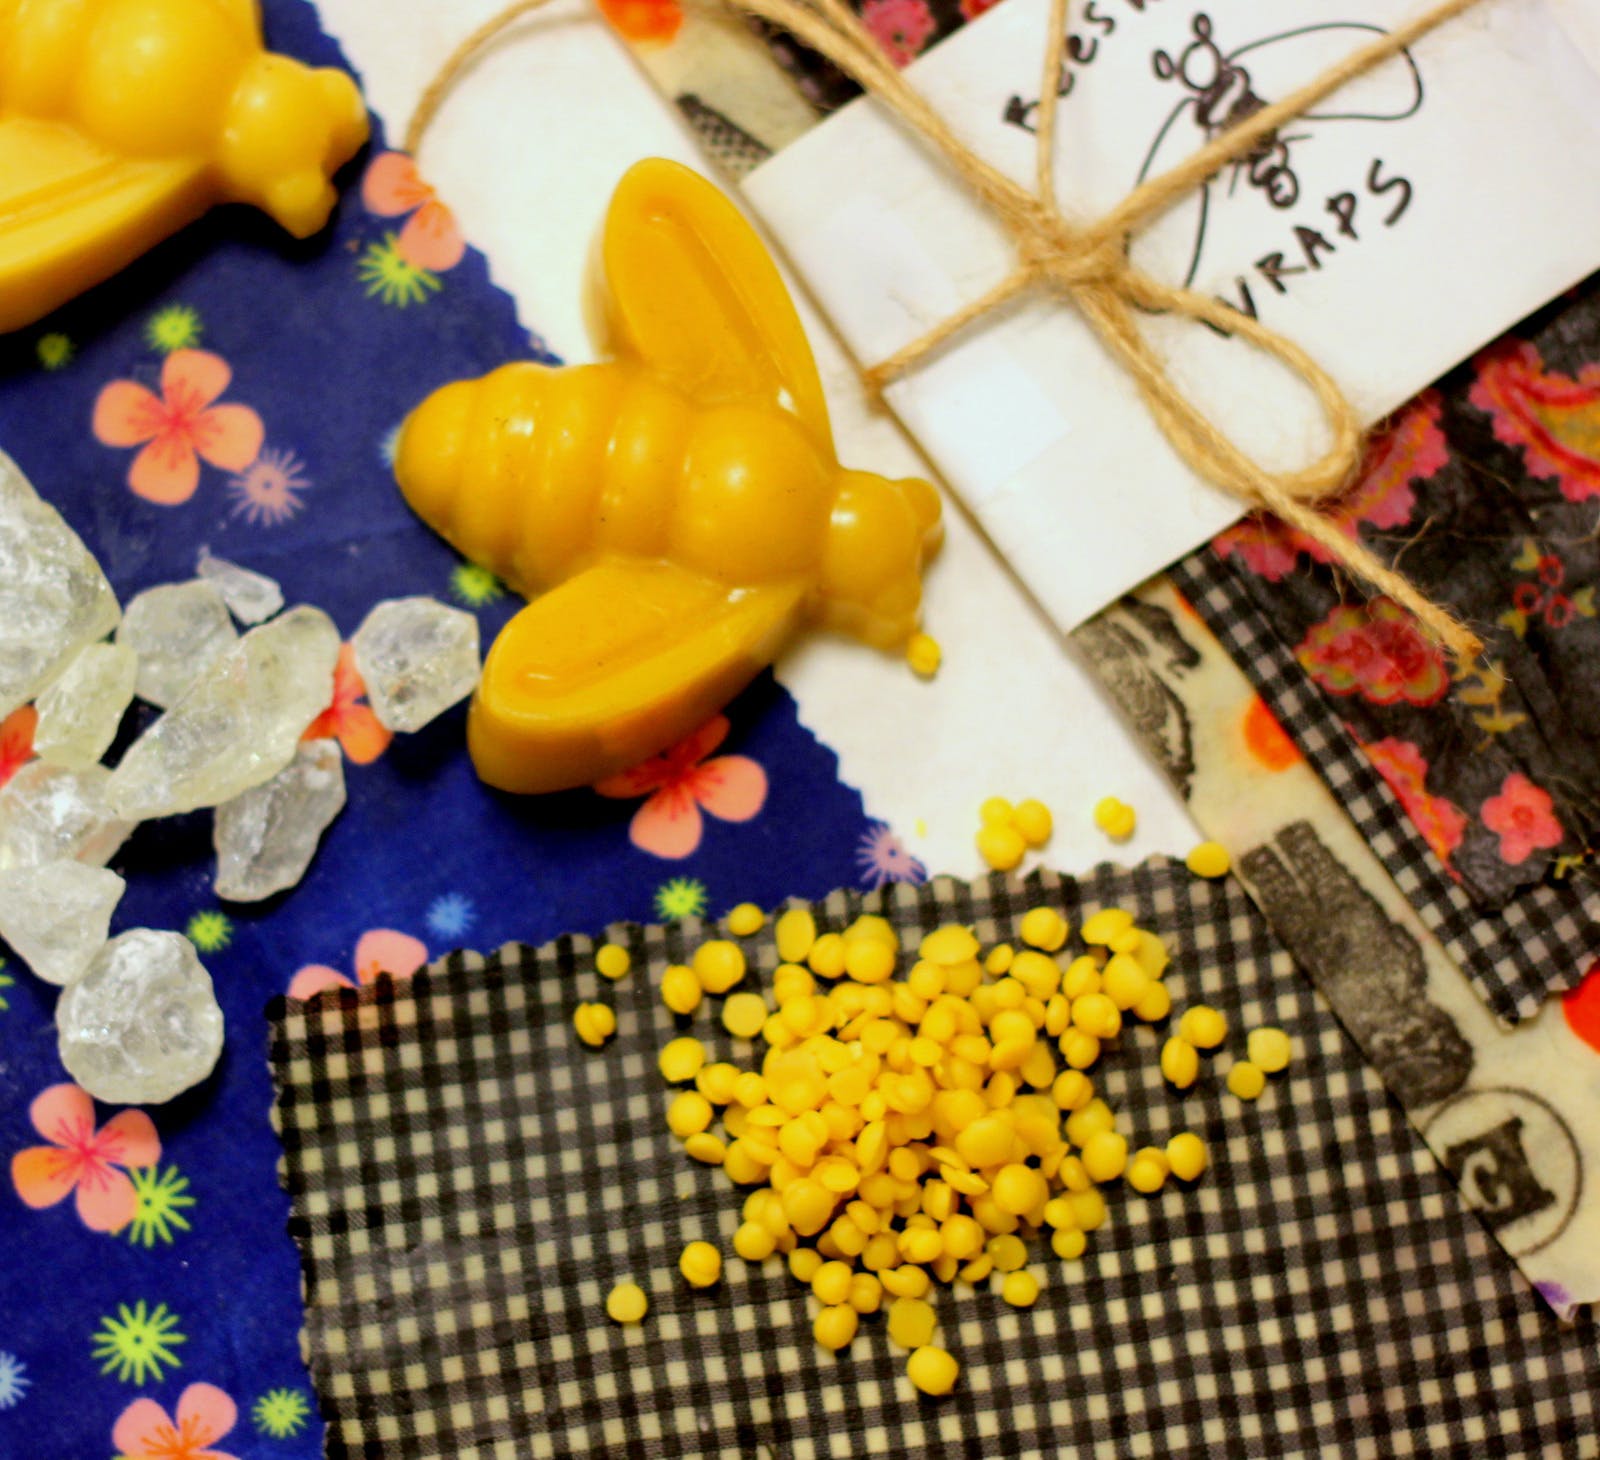 Online live streaming class Make Your Own Beeswax Wraps - Tourism Bookings WA